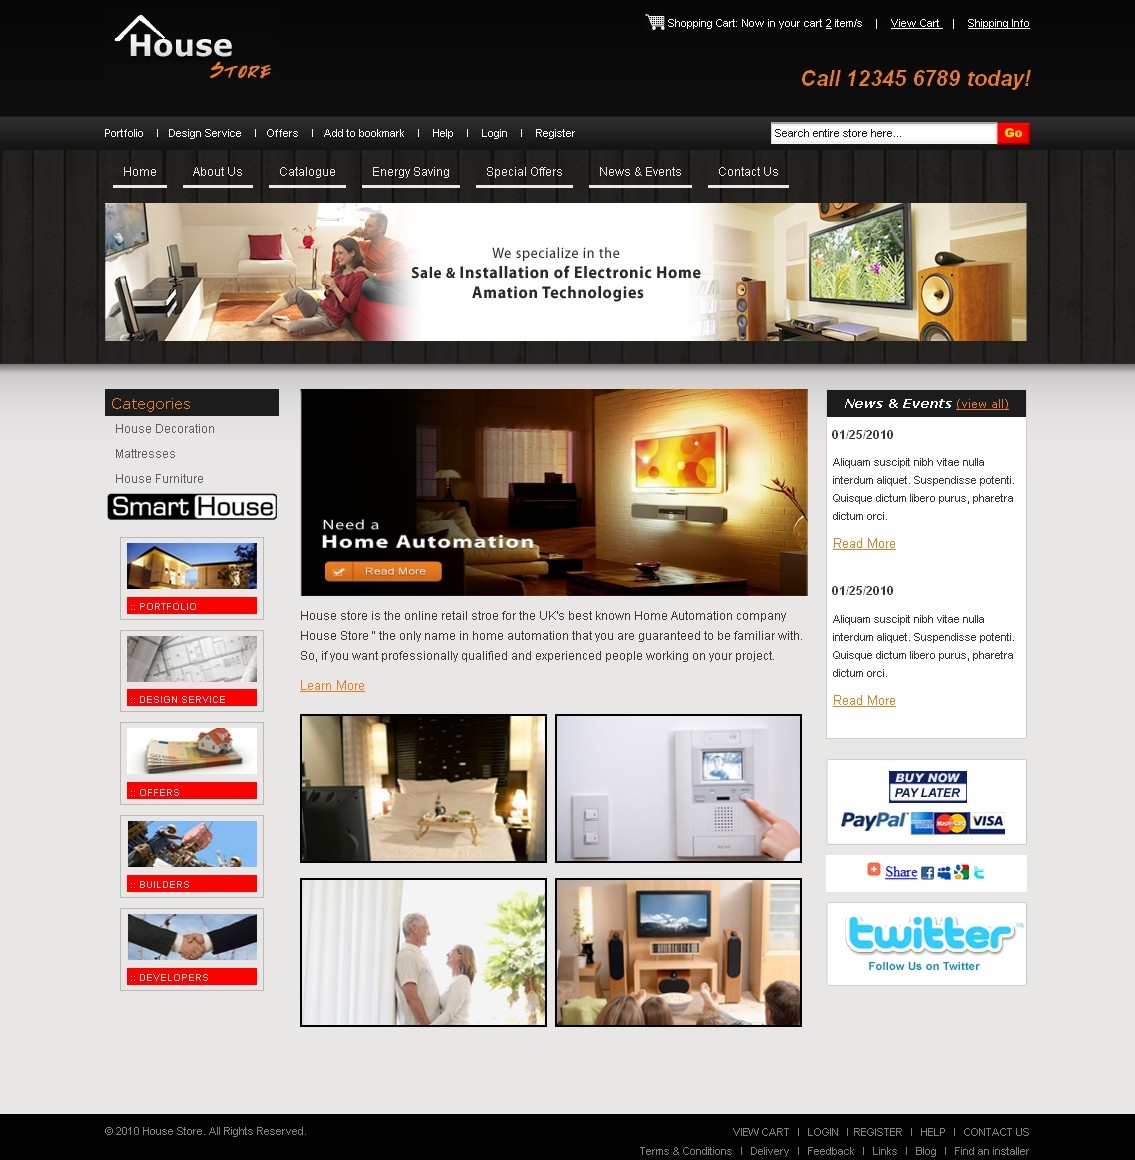 2012 Best Magento Theme for House hold web shop